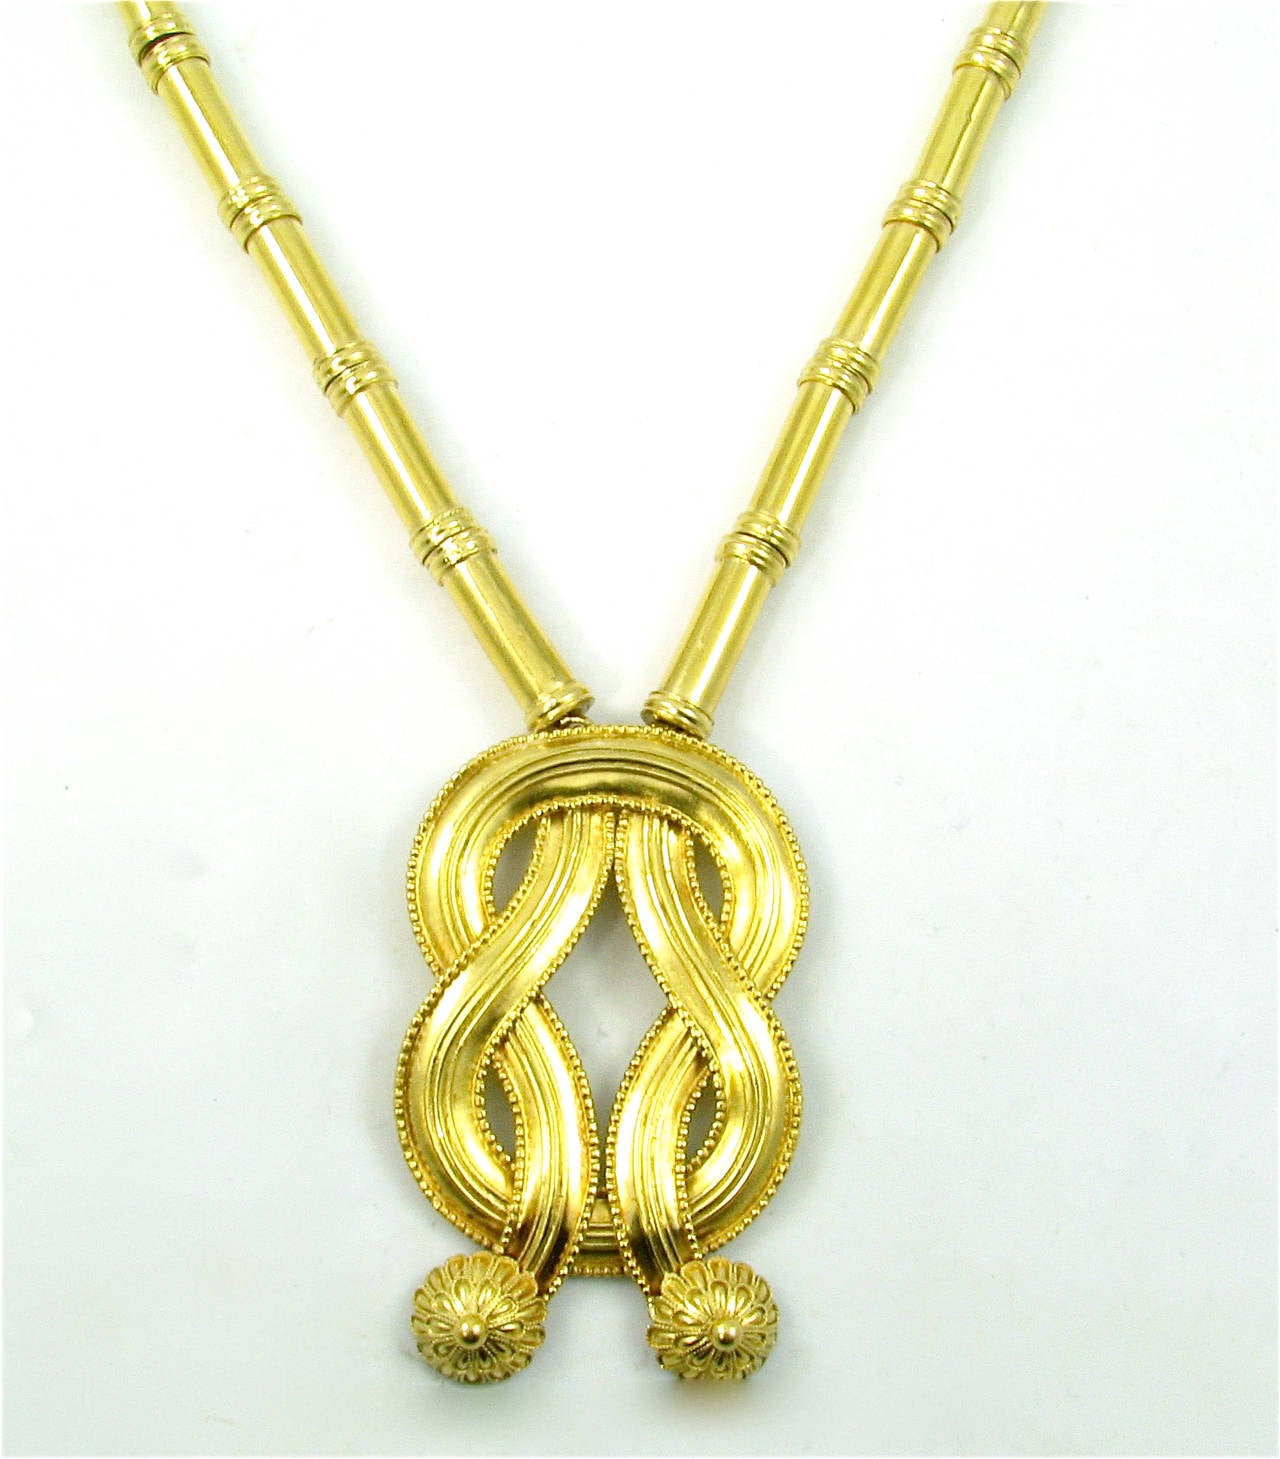 A 22 karat yellow gold “Hercules Knot” necklace, Ilias Lalaounis, Greece, Circa 1970s.  The long gold necklace  with tubular clasp is designed with tubular gold links on a braided chain, suspending a Hercules knot with gold floral bosses.  The